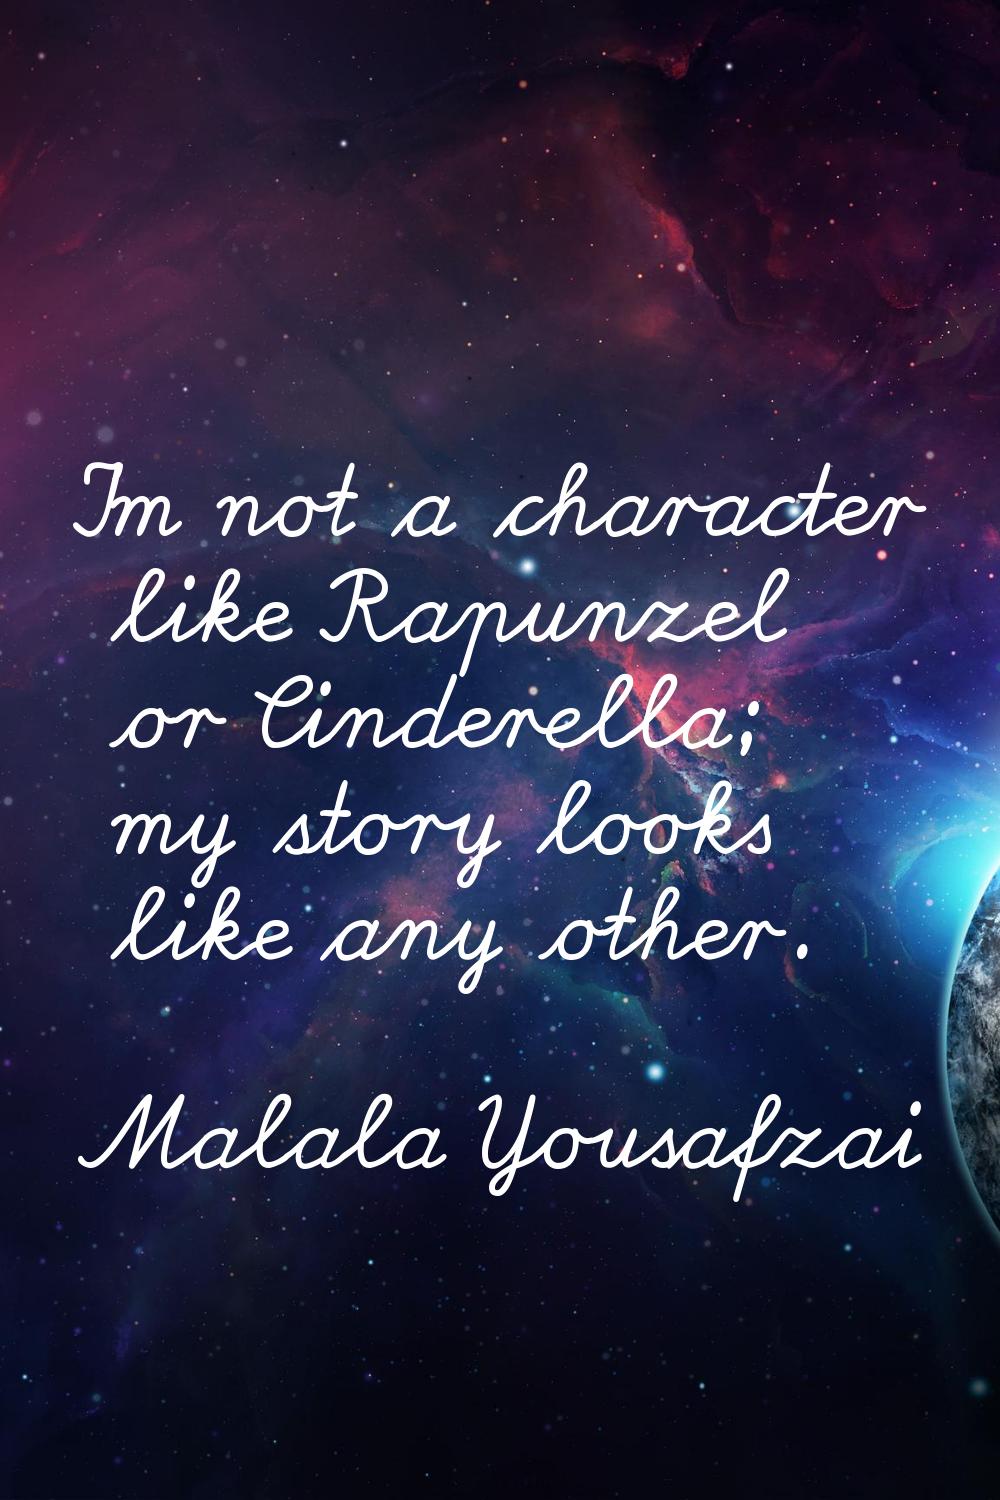 I'm not a character like Rapunzel or Cinderella; my story looks like any other.